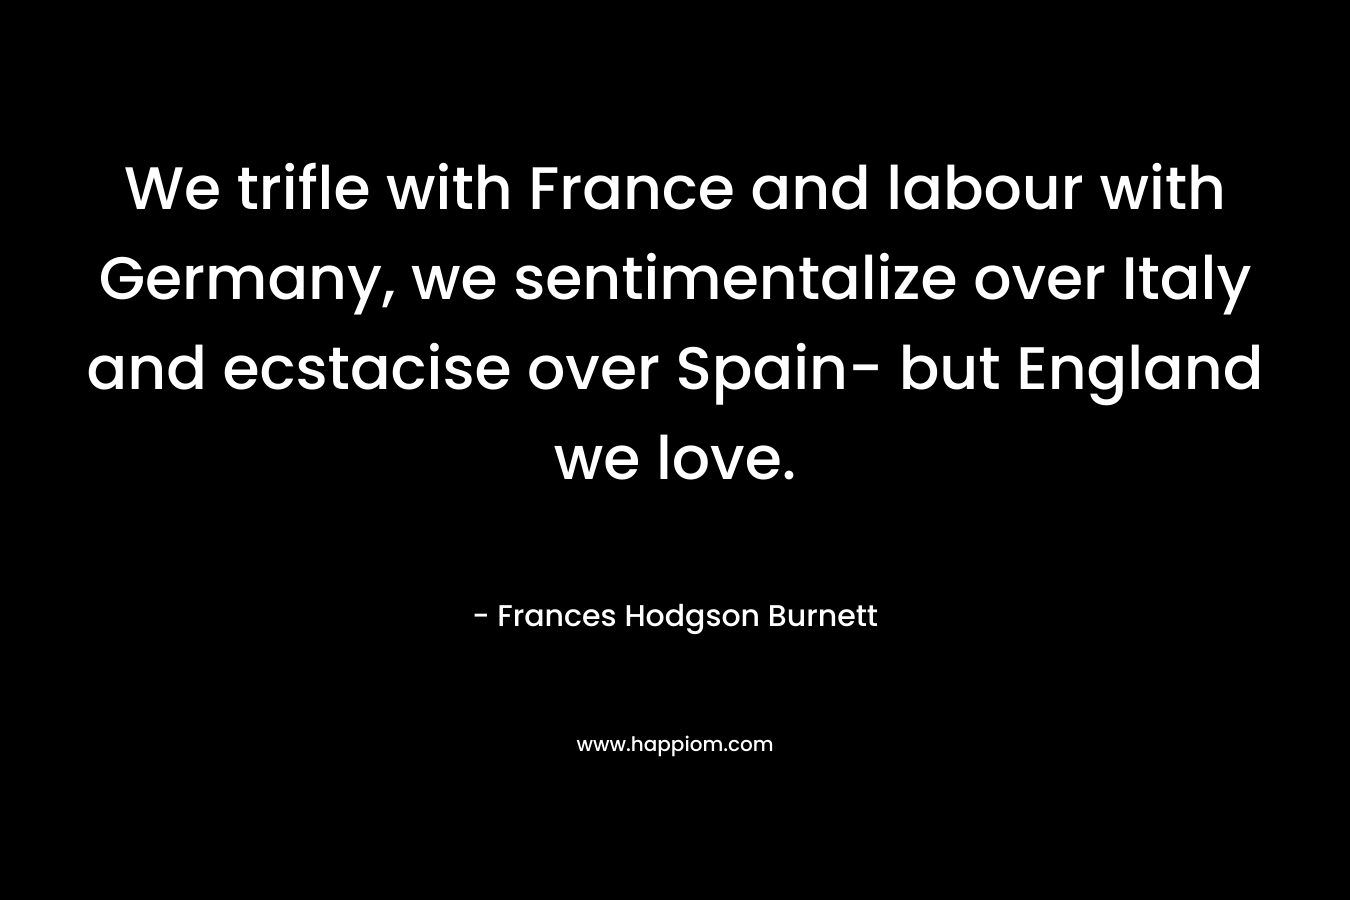 We trifle with France and labour with Germany, we sentimentalize over Italy and ecstacise over Spain- but England we love. – Frances Hodgson Burnett